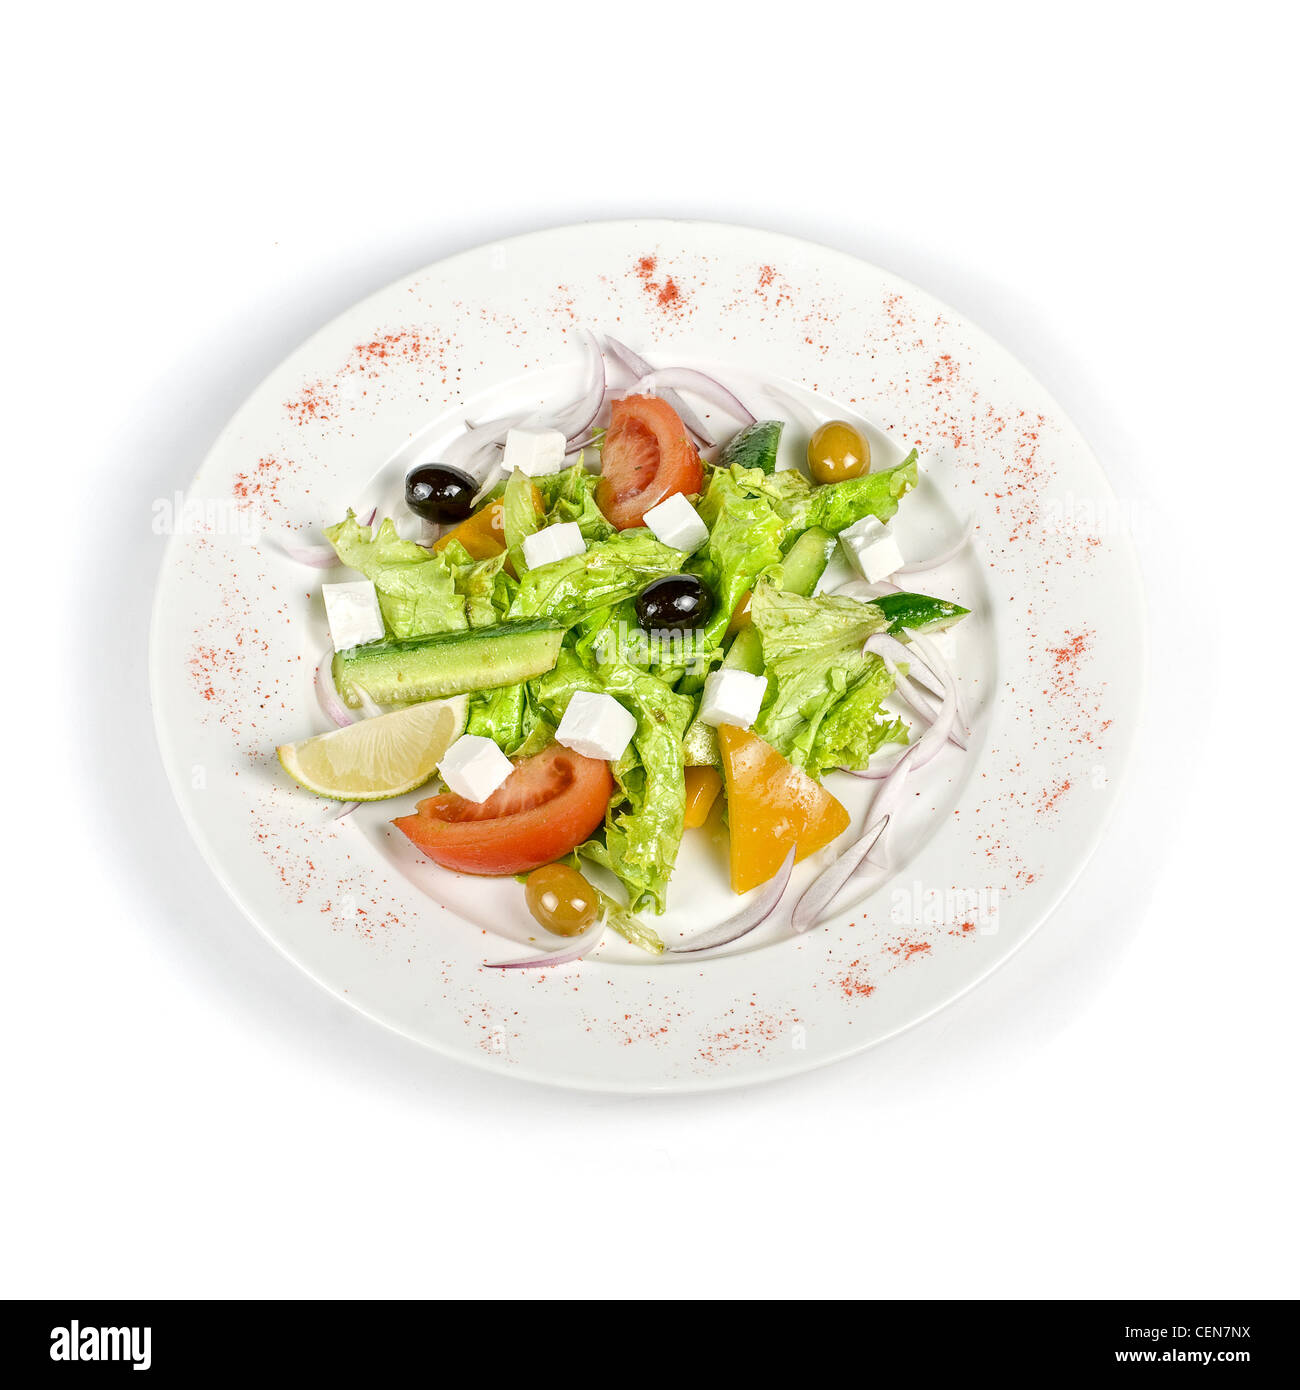 Greece salad dish isolated on a white background Stock Photo